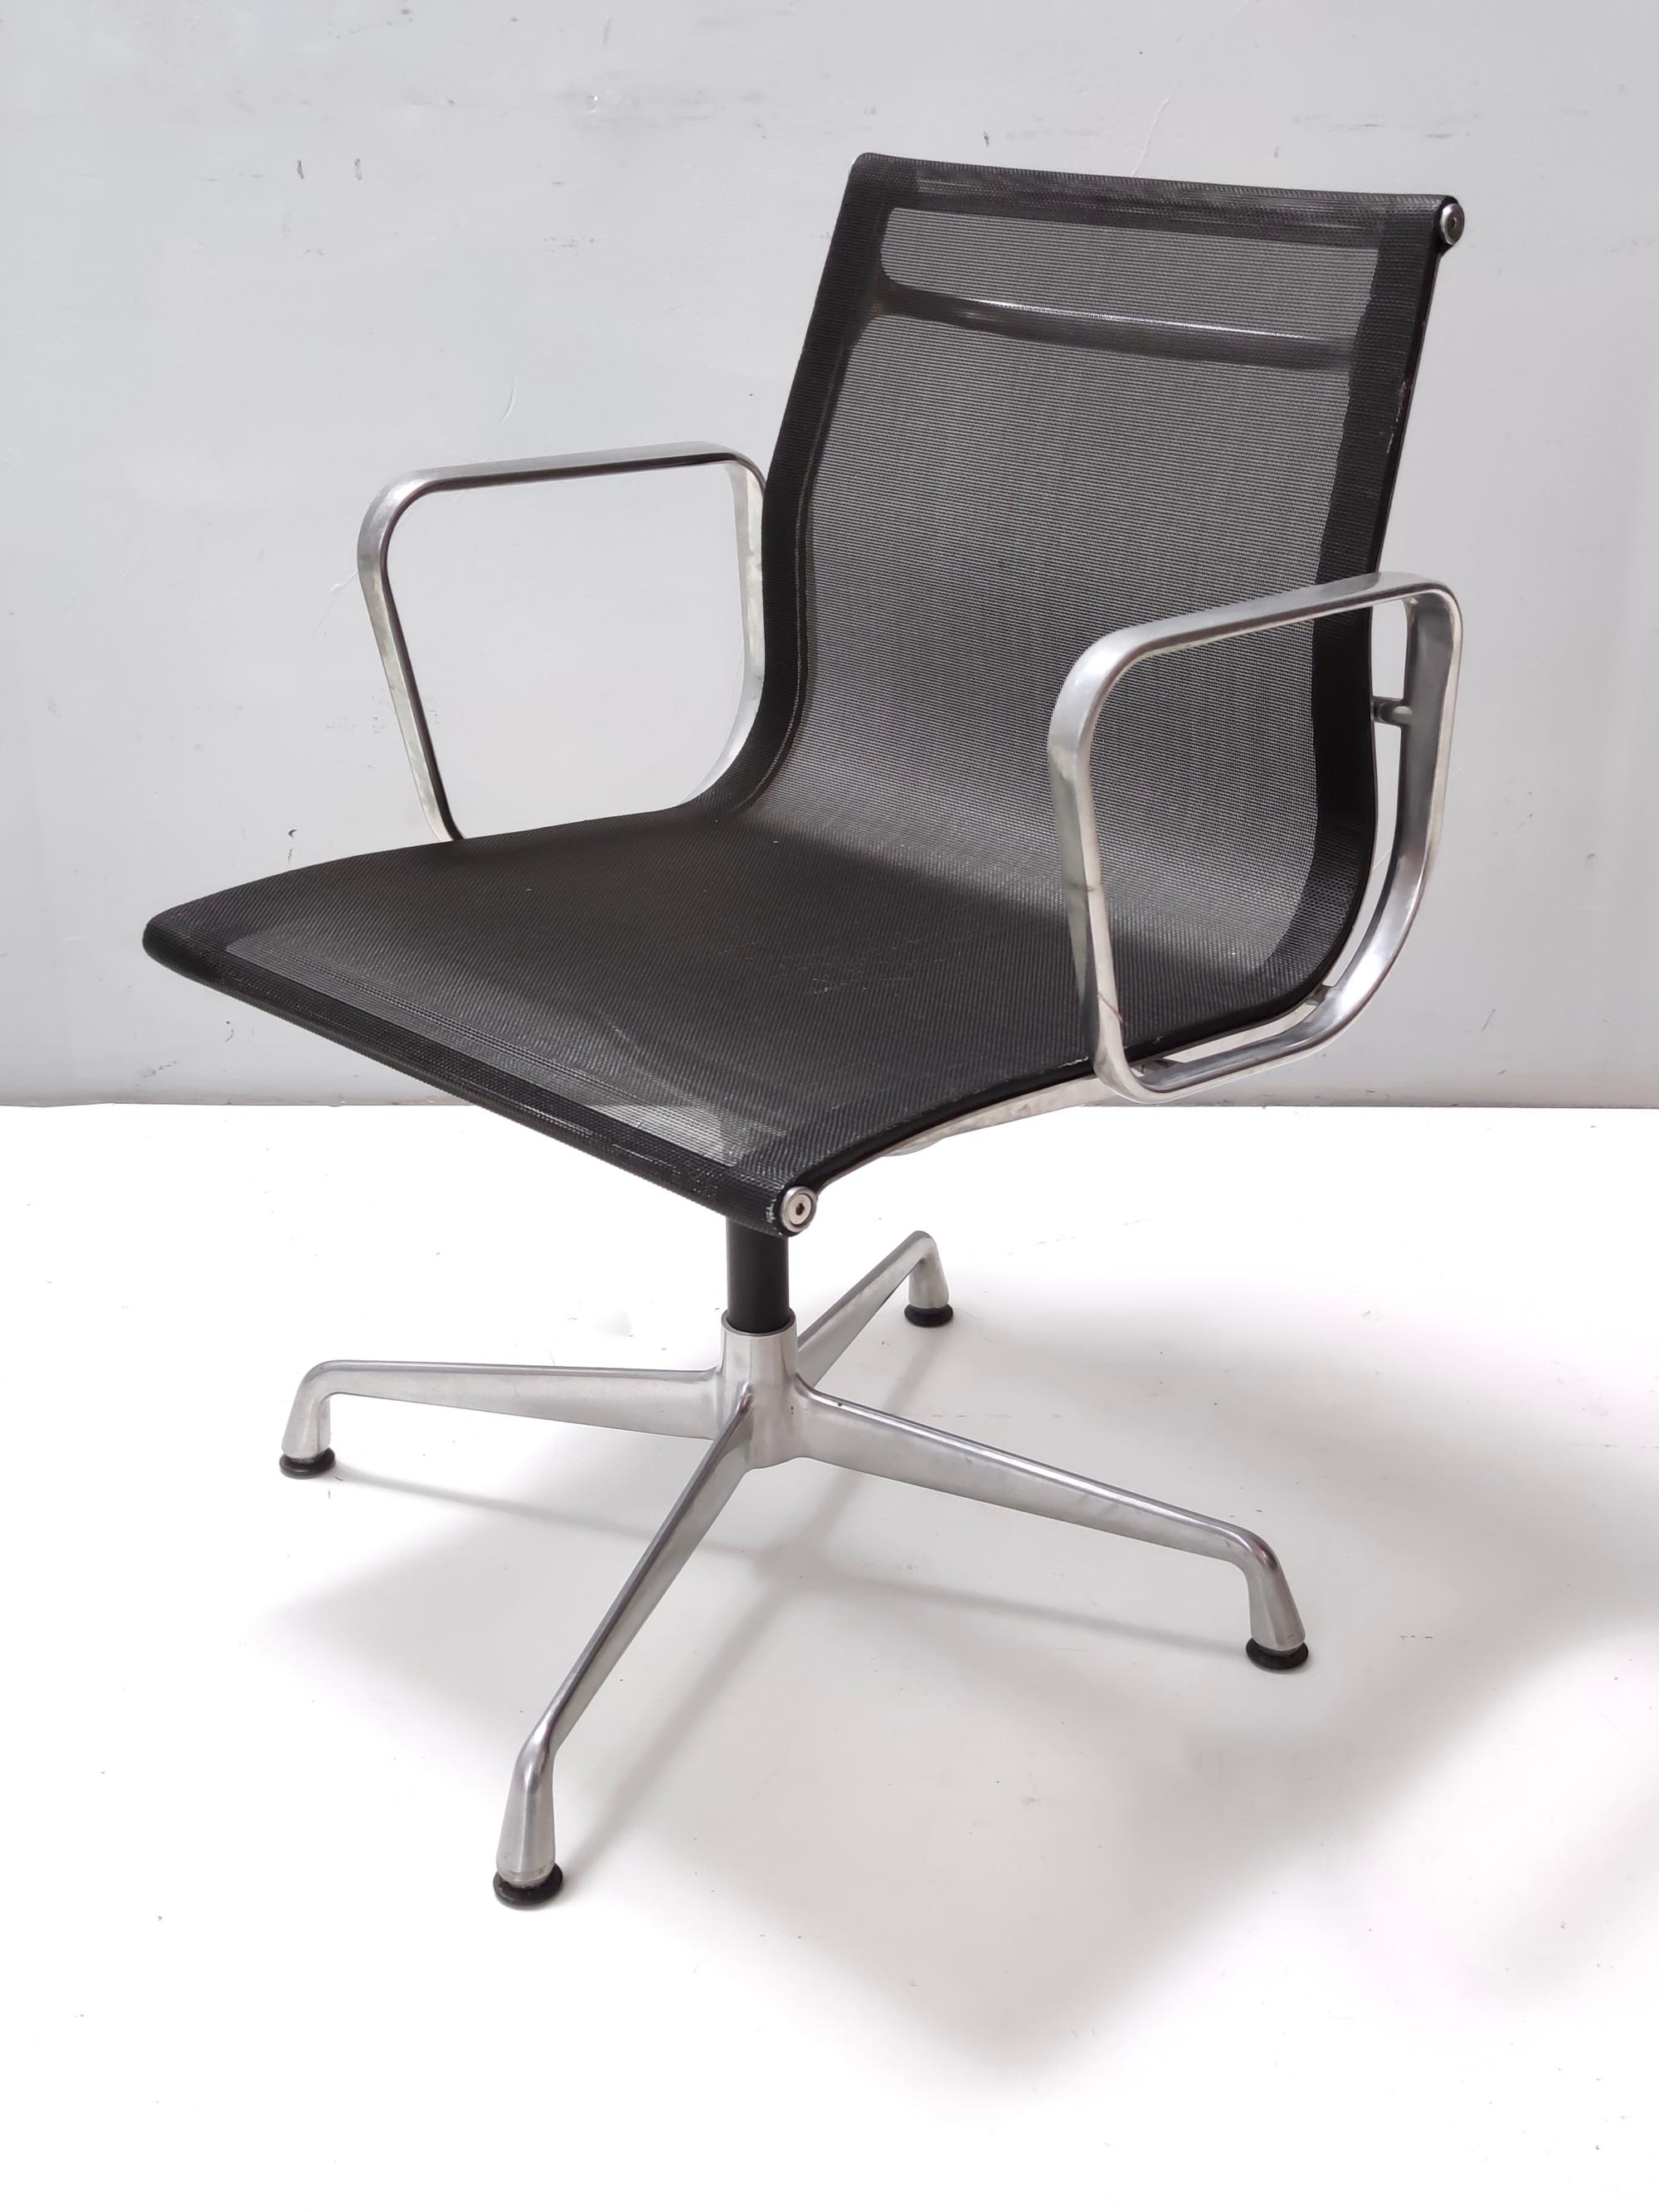 revolving office chair price